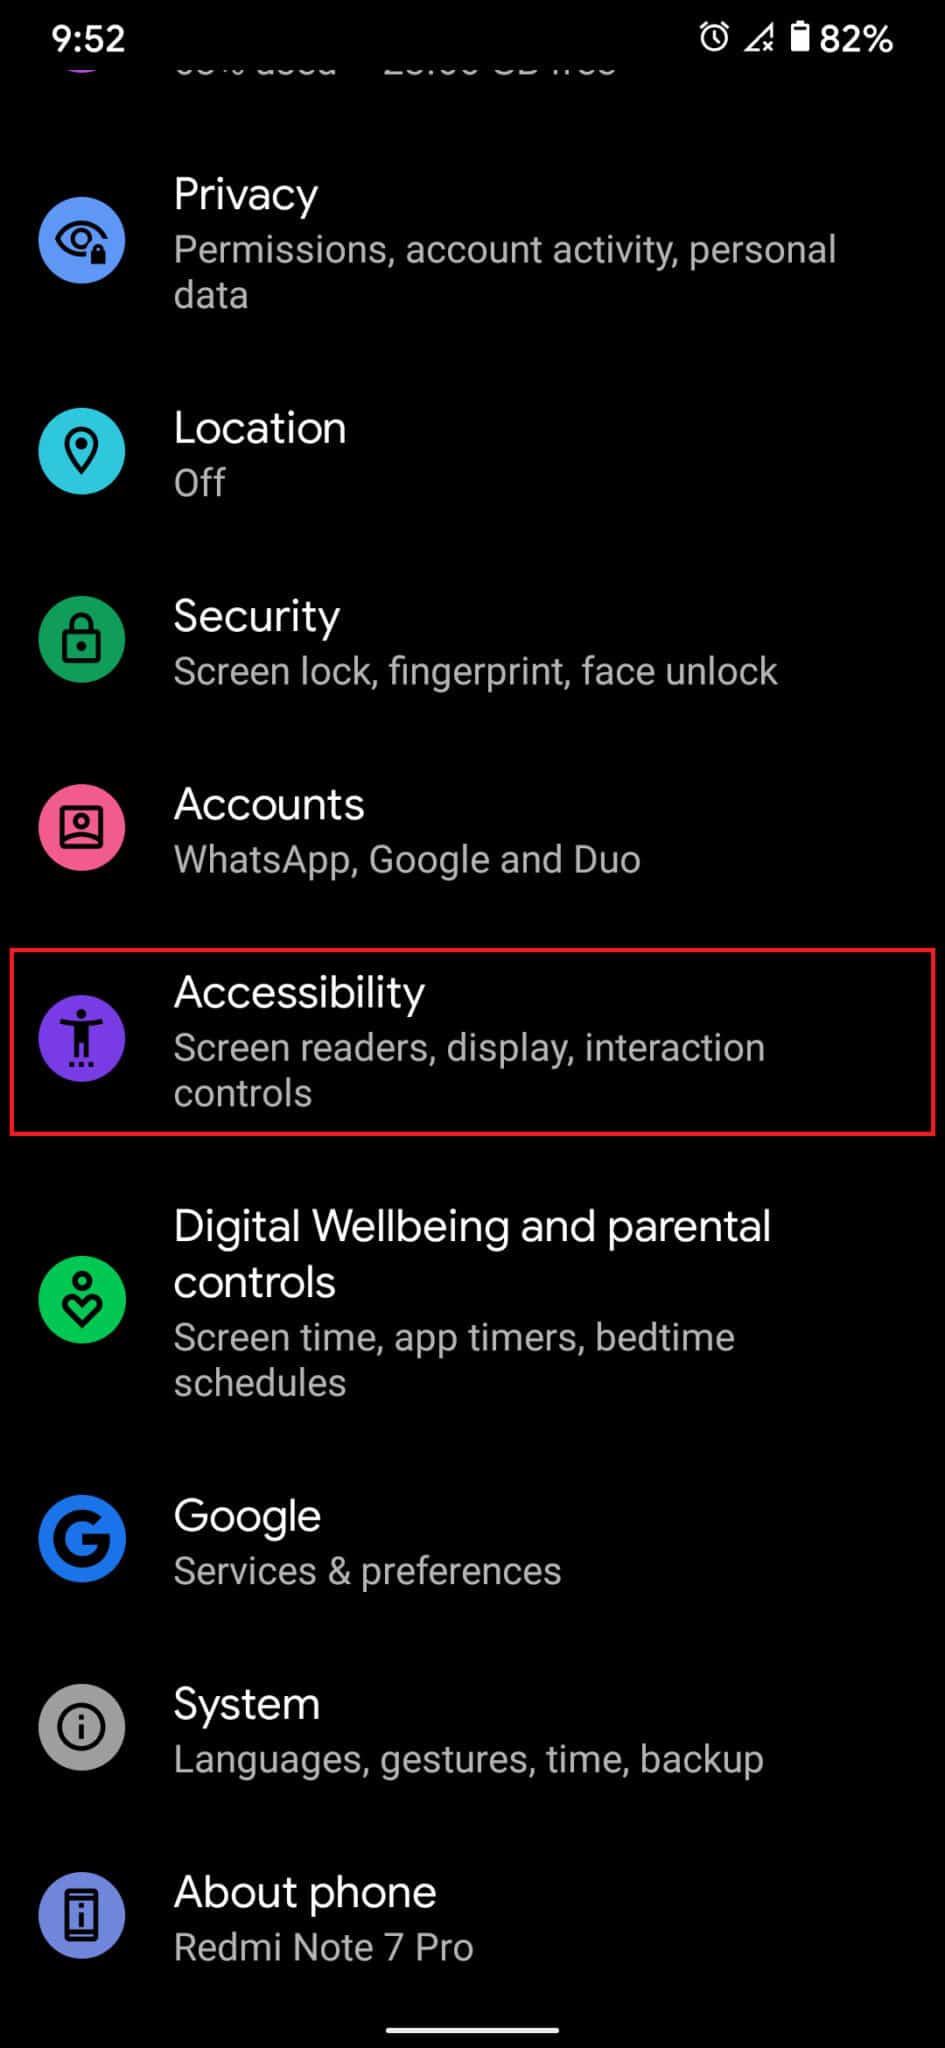 Scroll down and tap on Accessibility